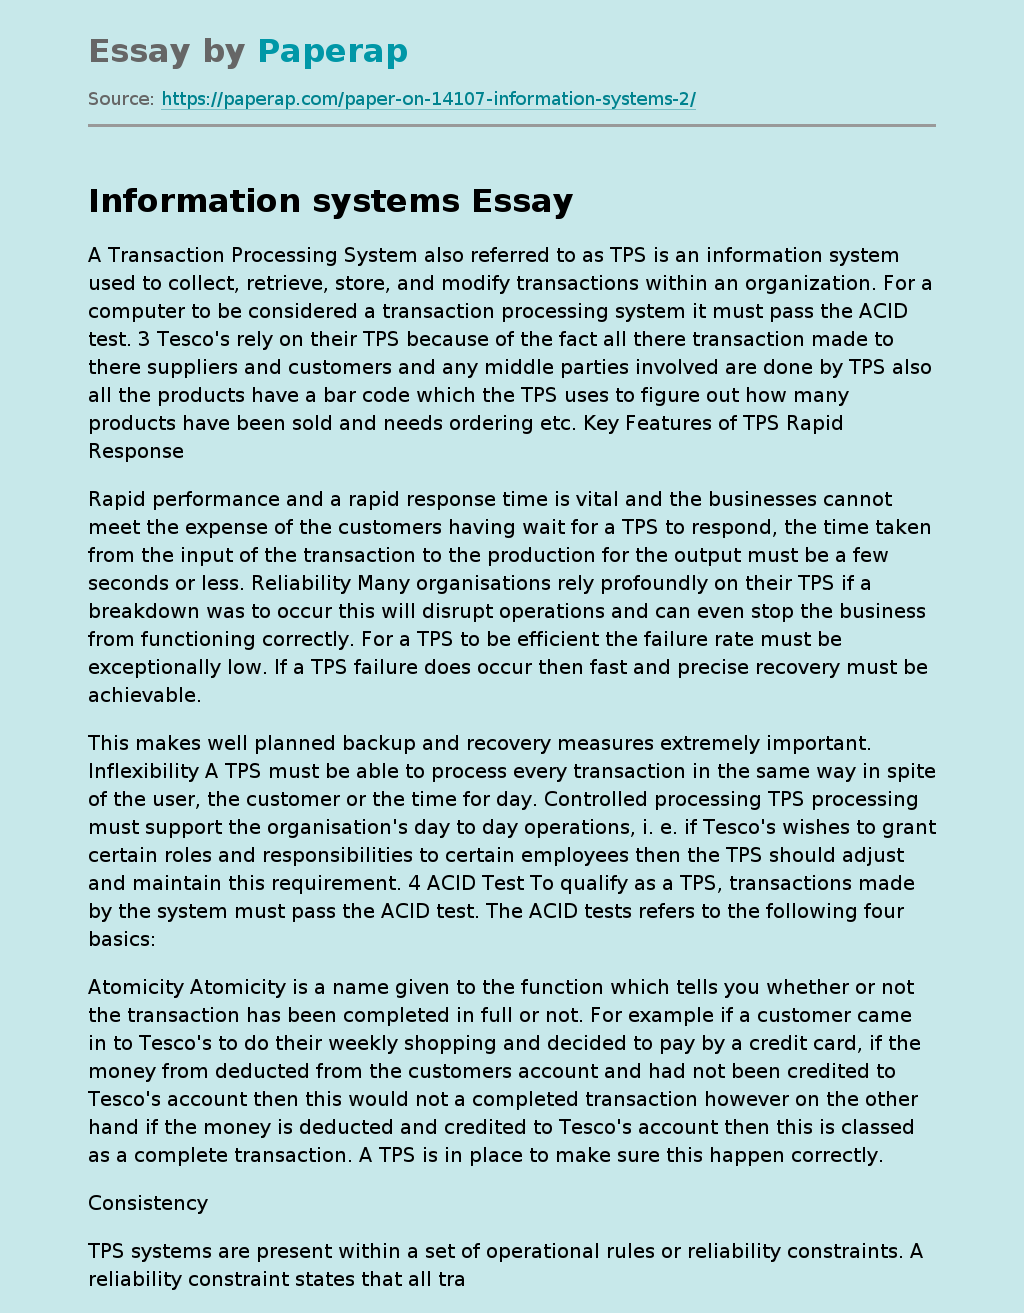 Information systems A Transaction Processing System